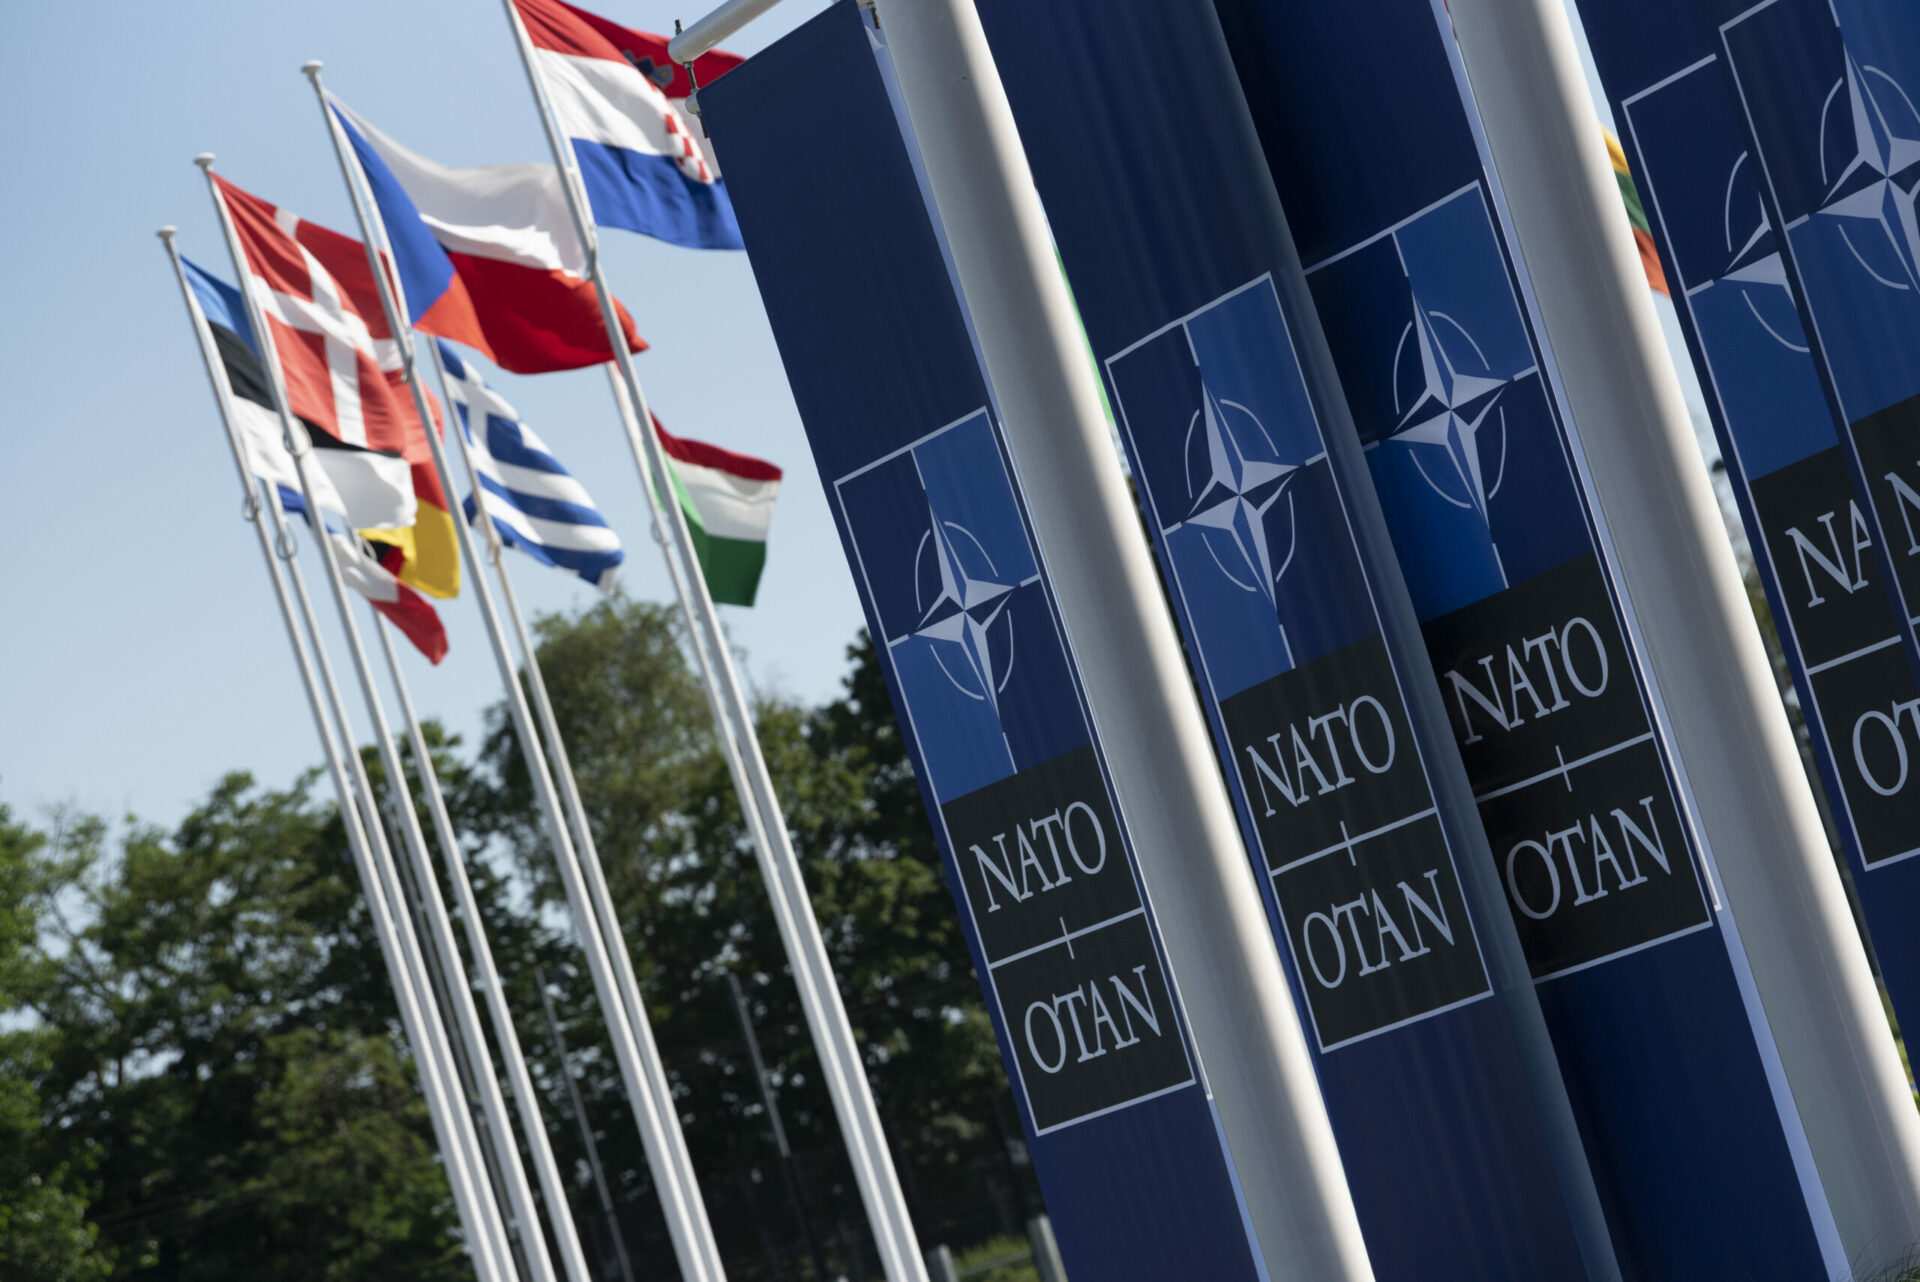 8 NATO envoys to visit Seoul to discuss Indo-Pacific security